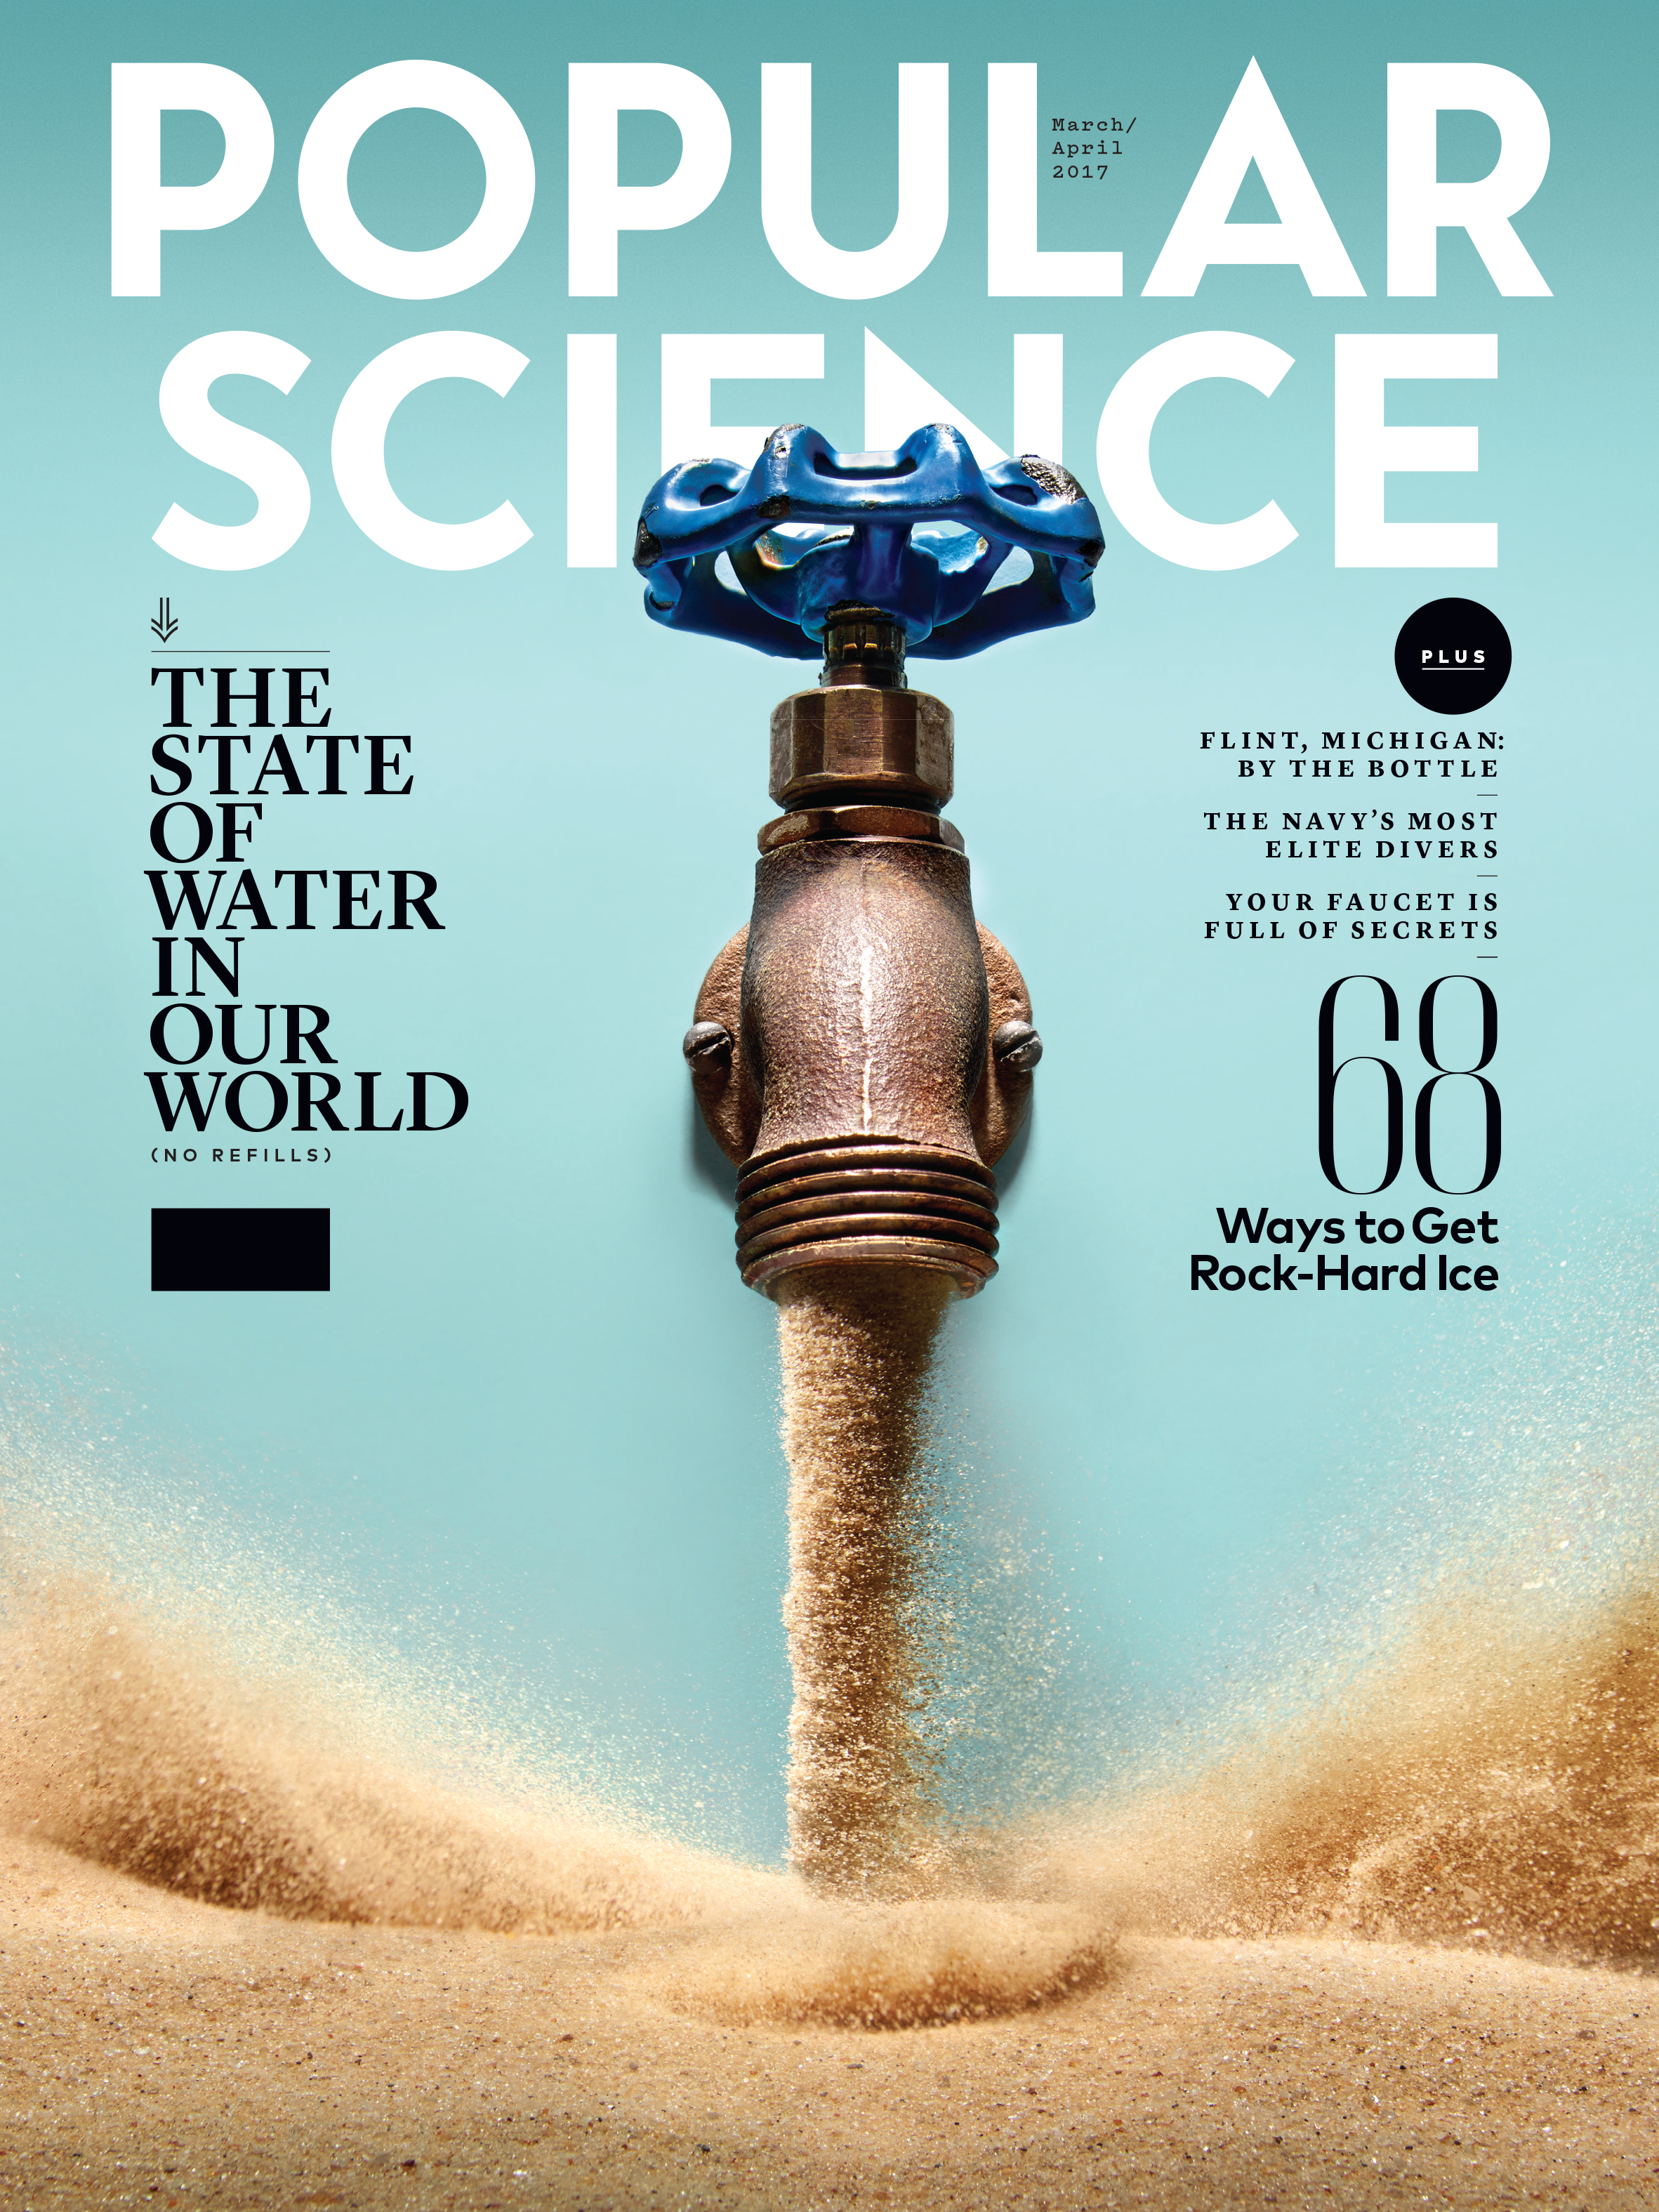 Popular Science - “The State of Water in Our World,” March/April 2017